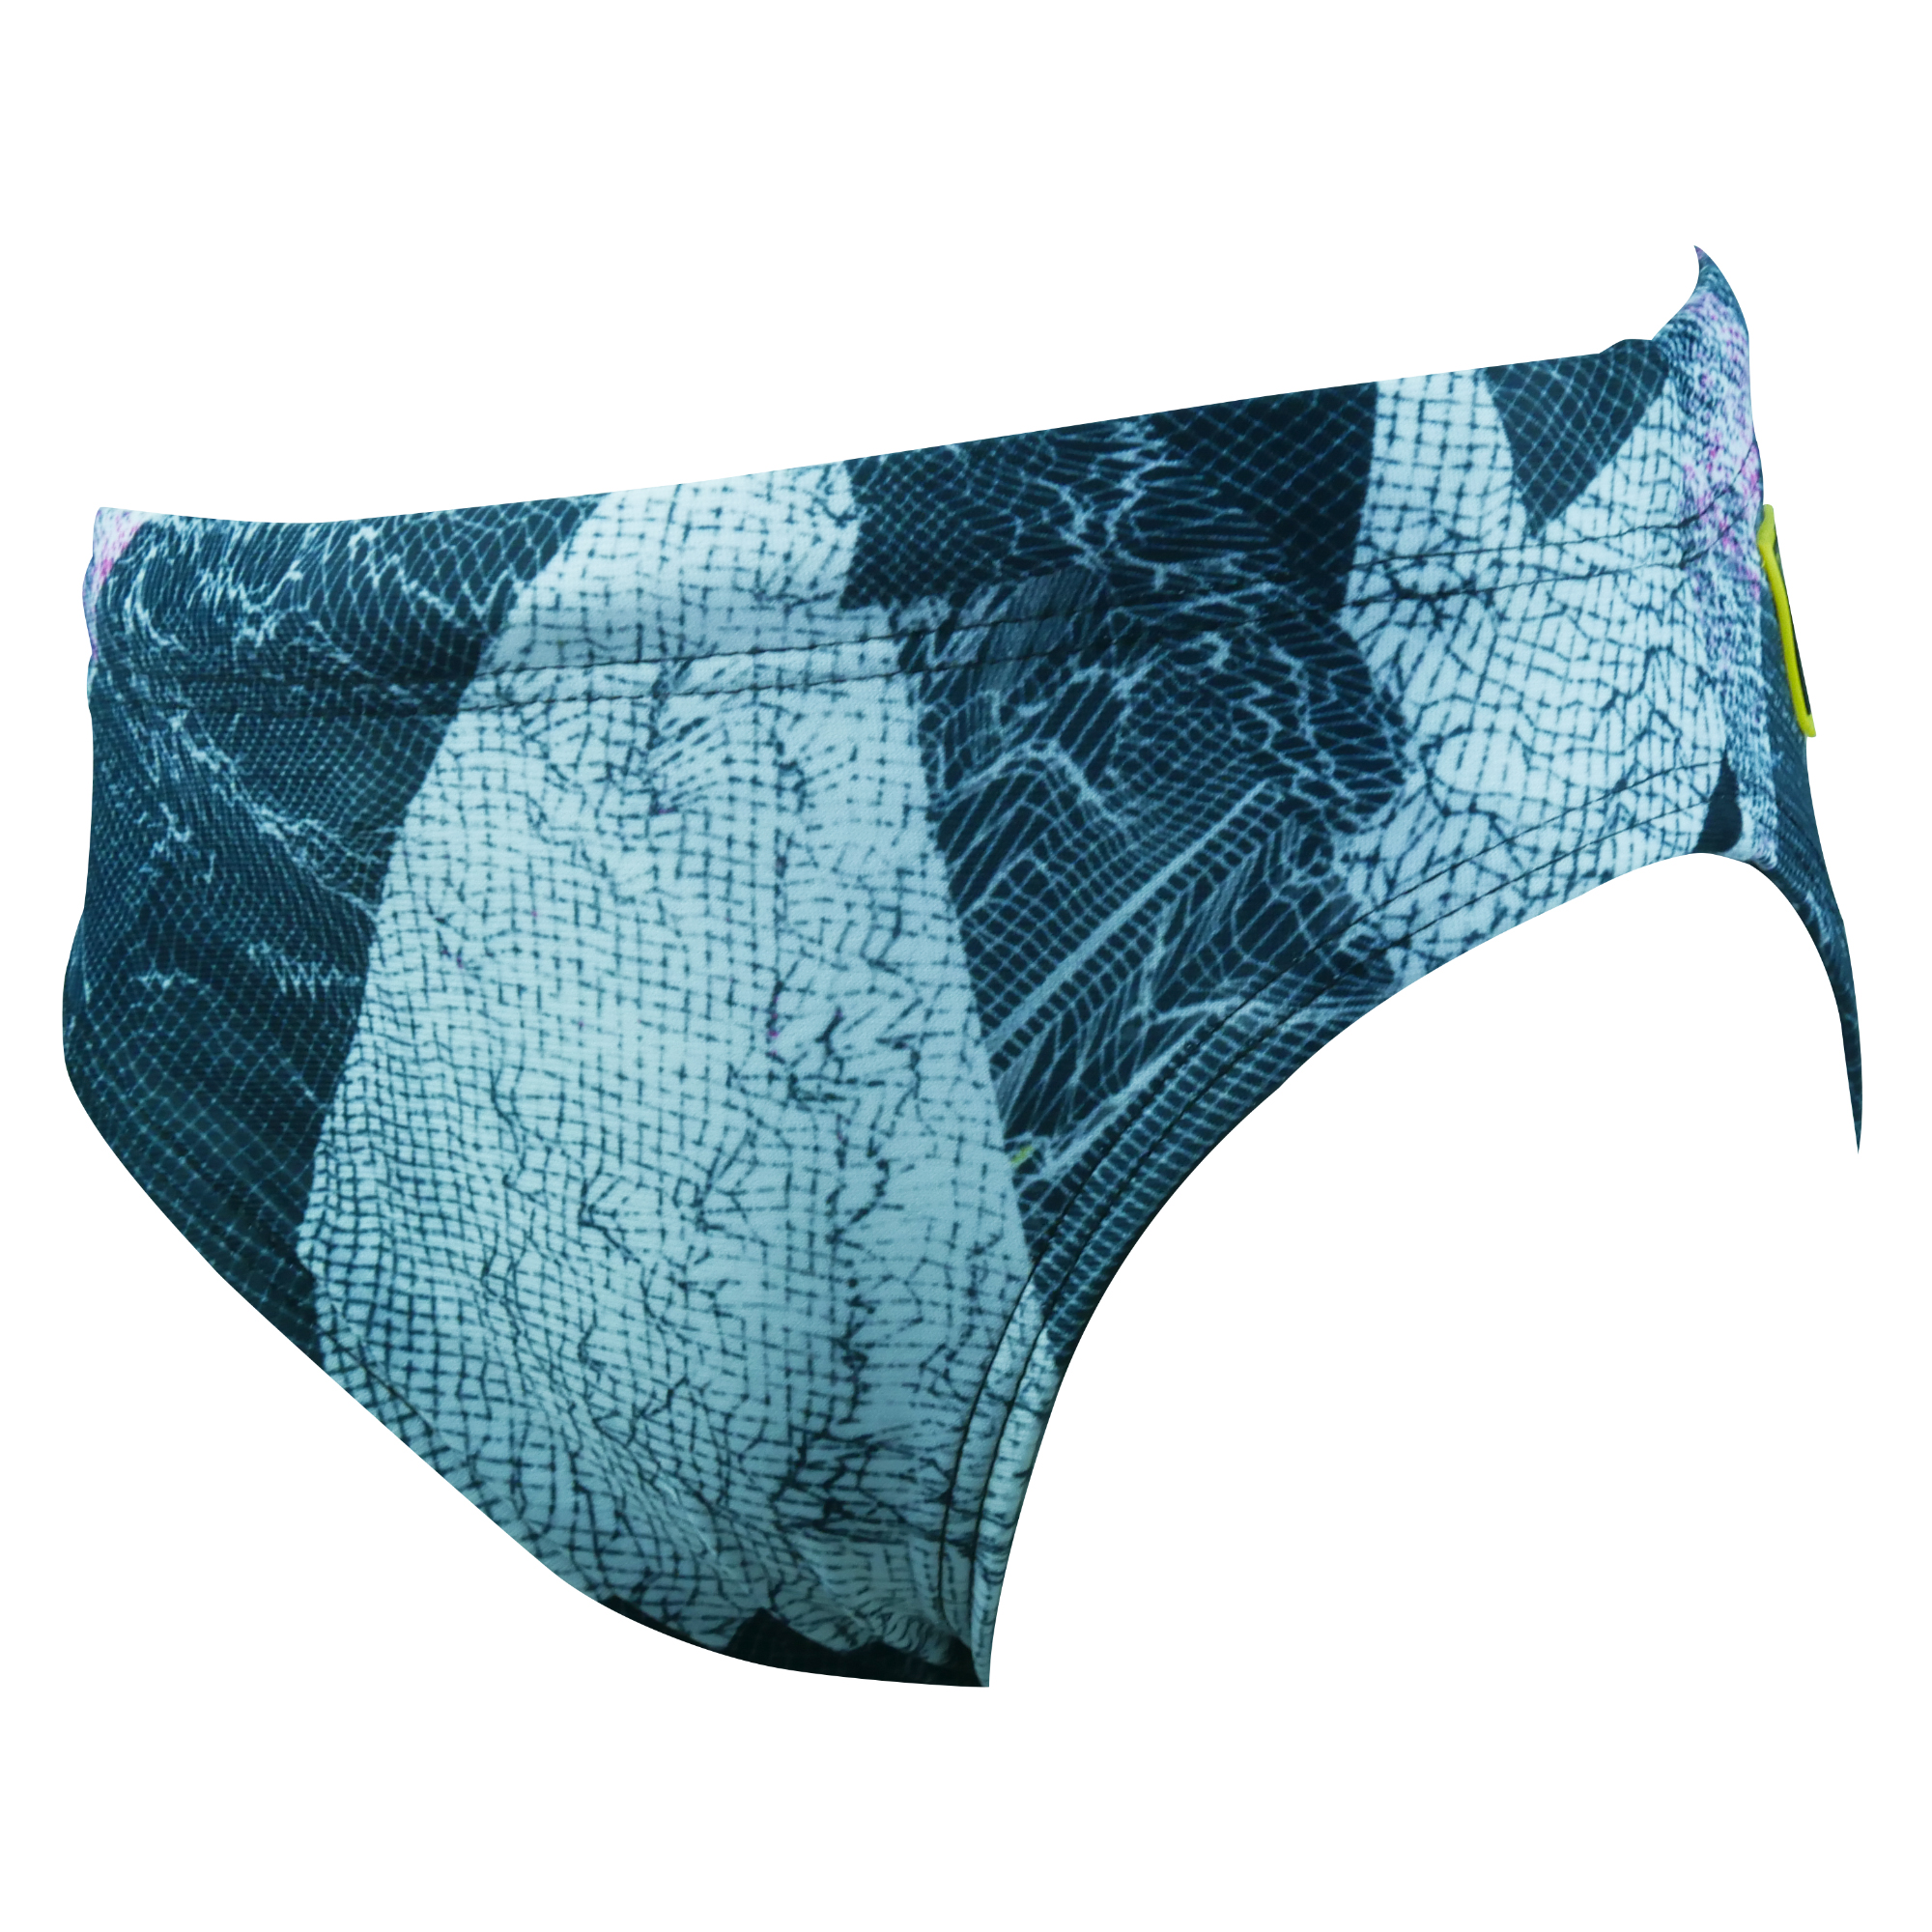 Starburst FINIS Youth Brief Rotto Training and Competition Swimwear 26